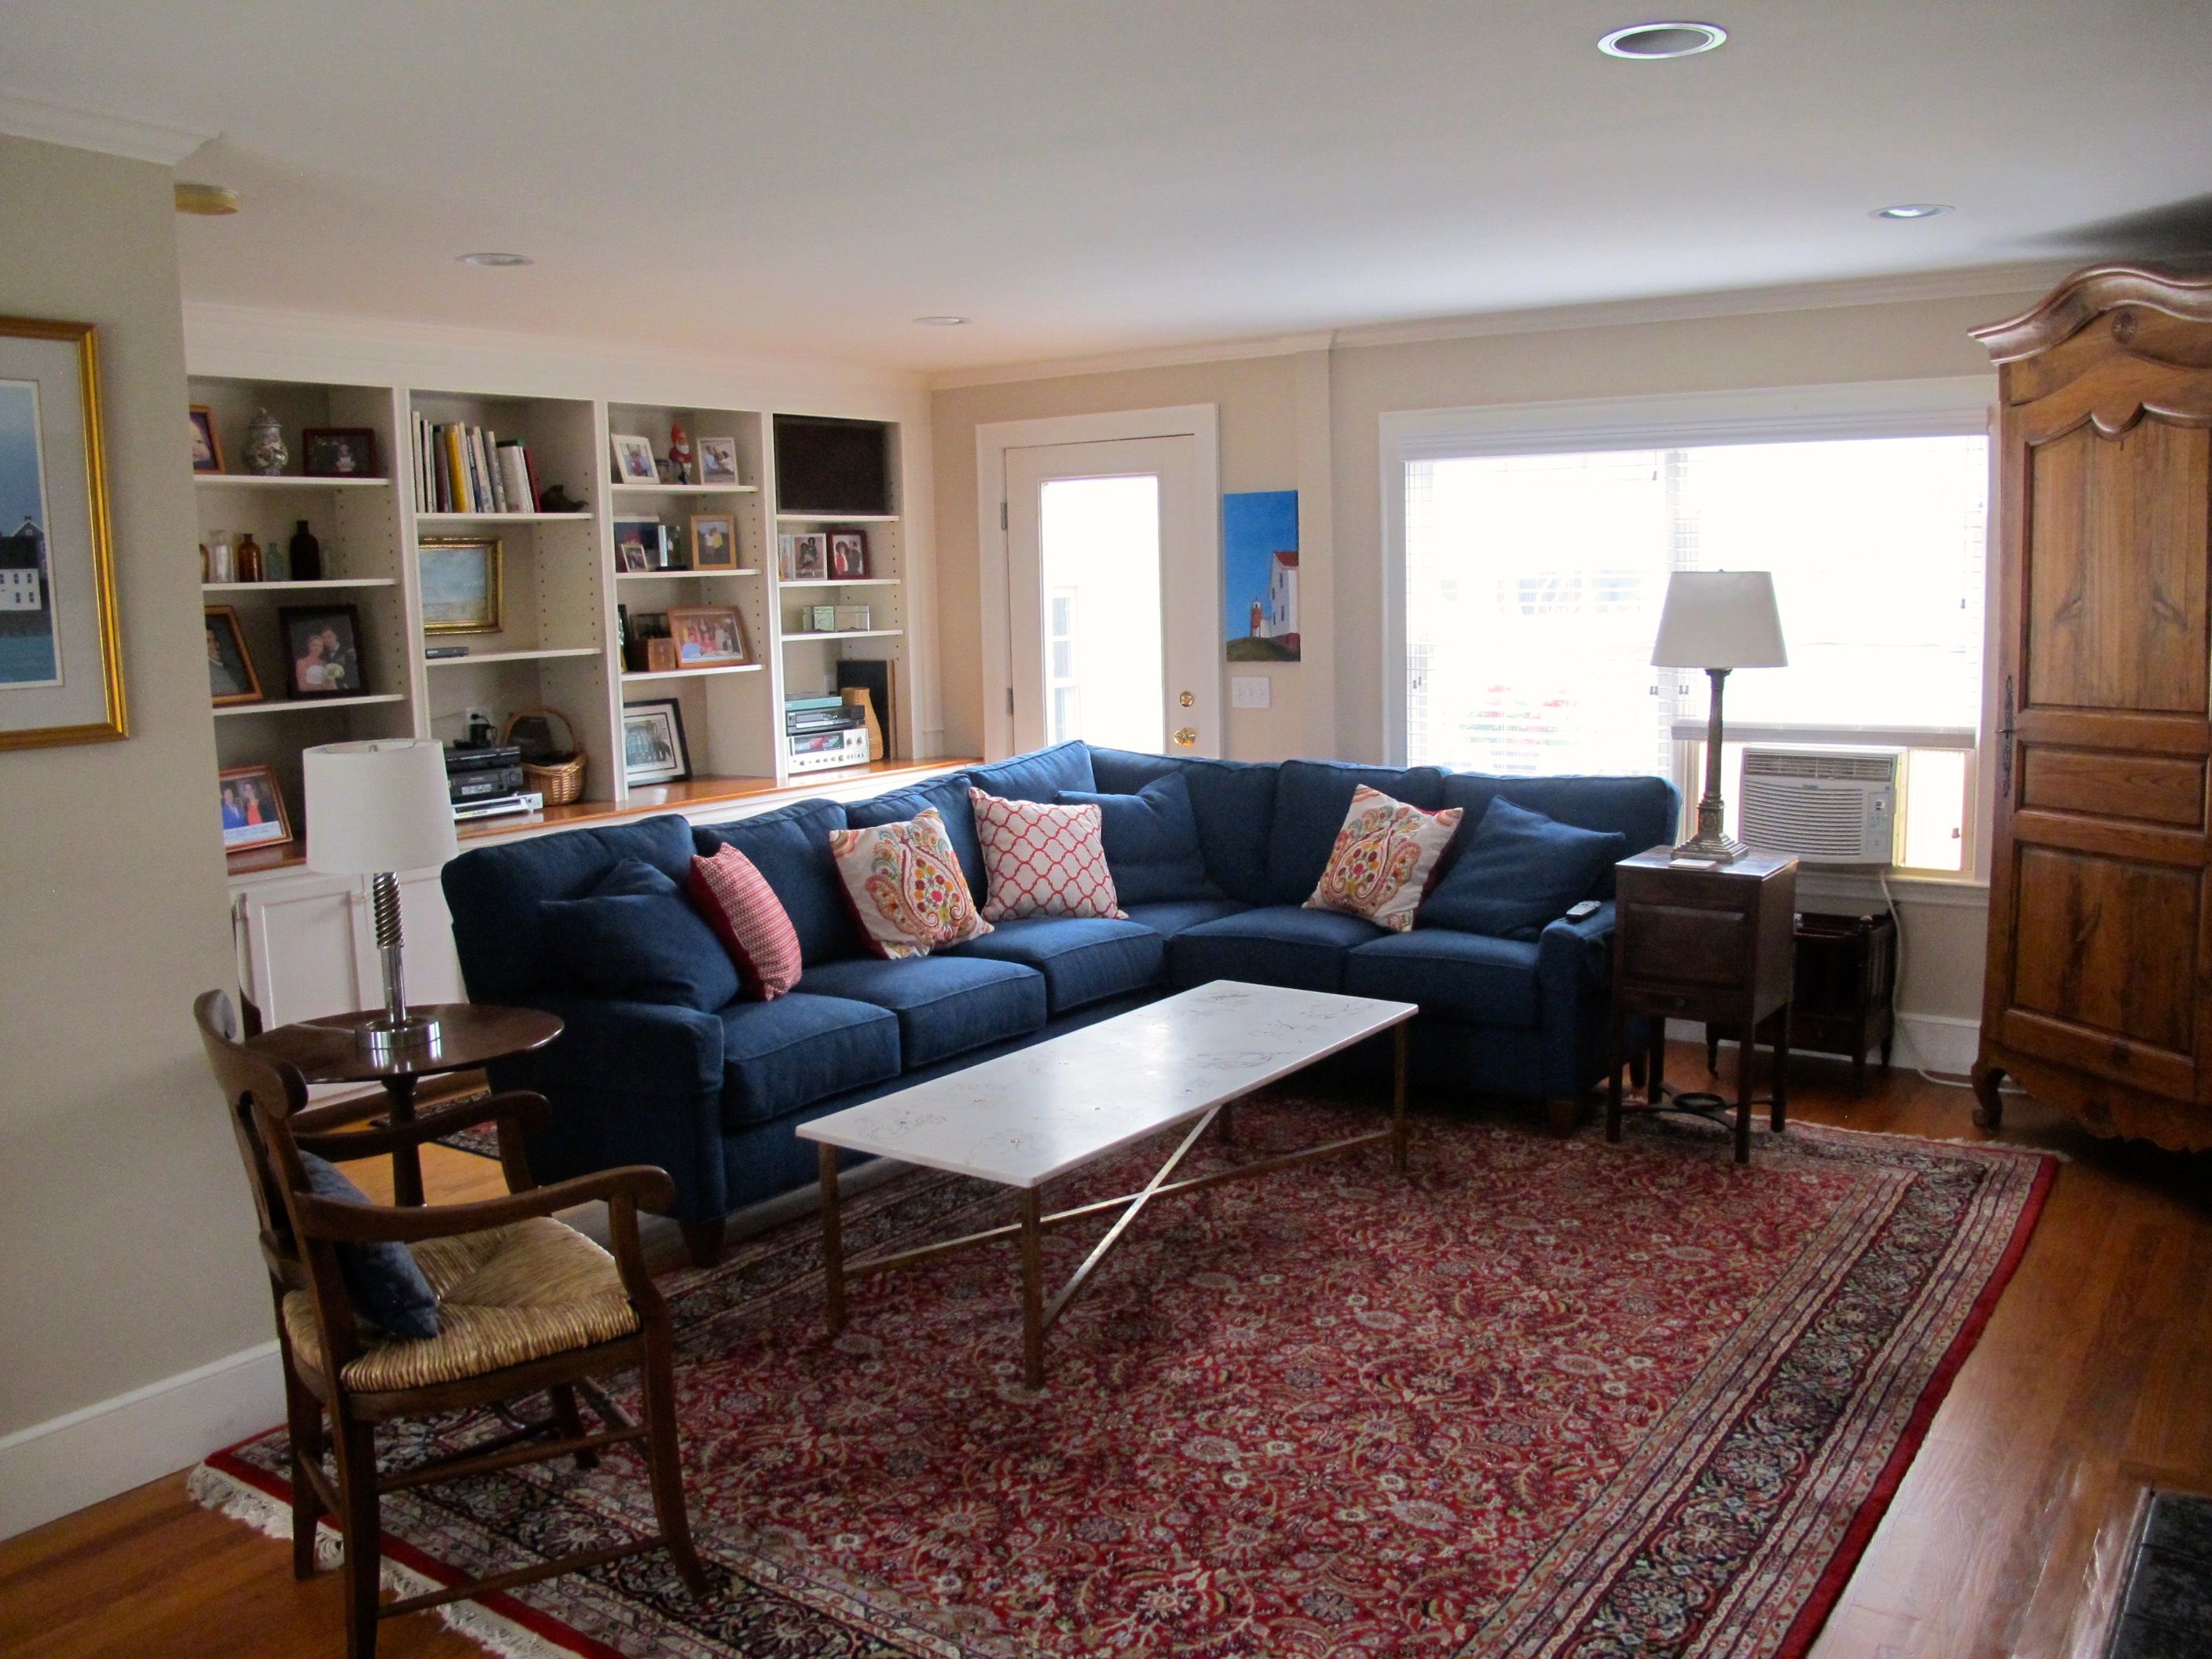 Blue couch on floor | Budget Flooring, Inc.